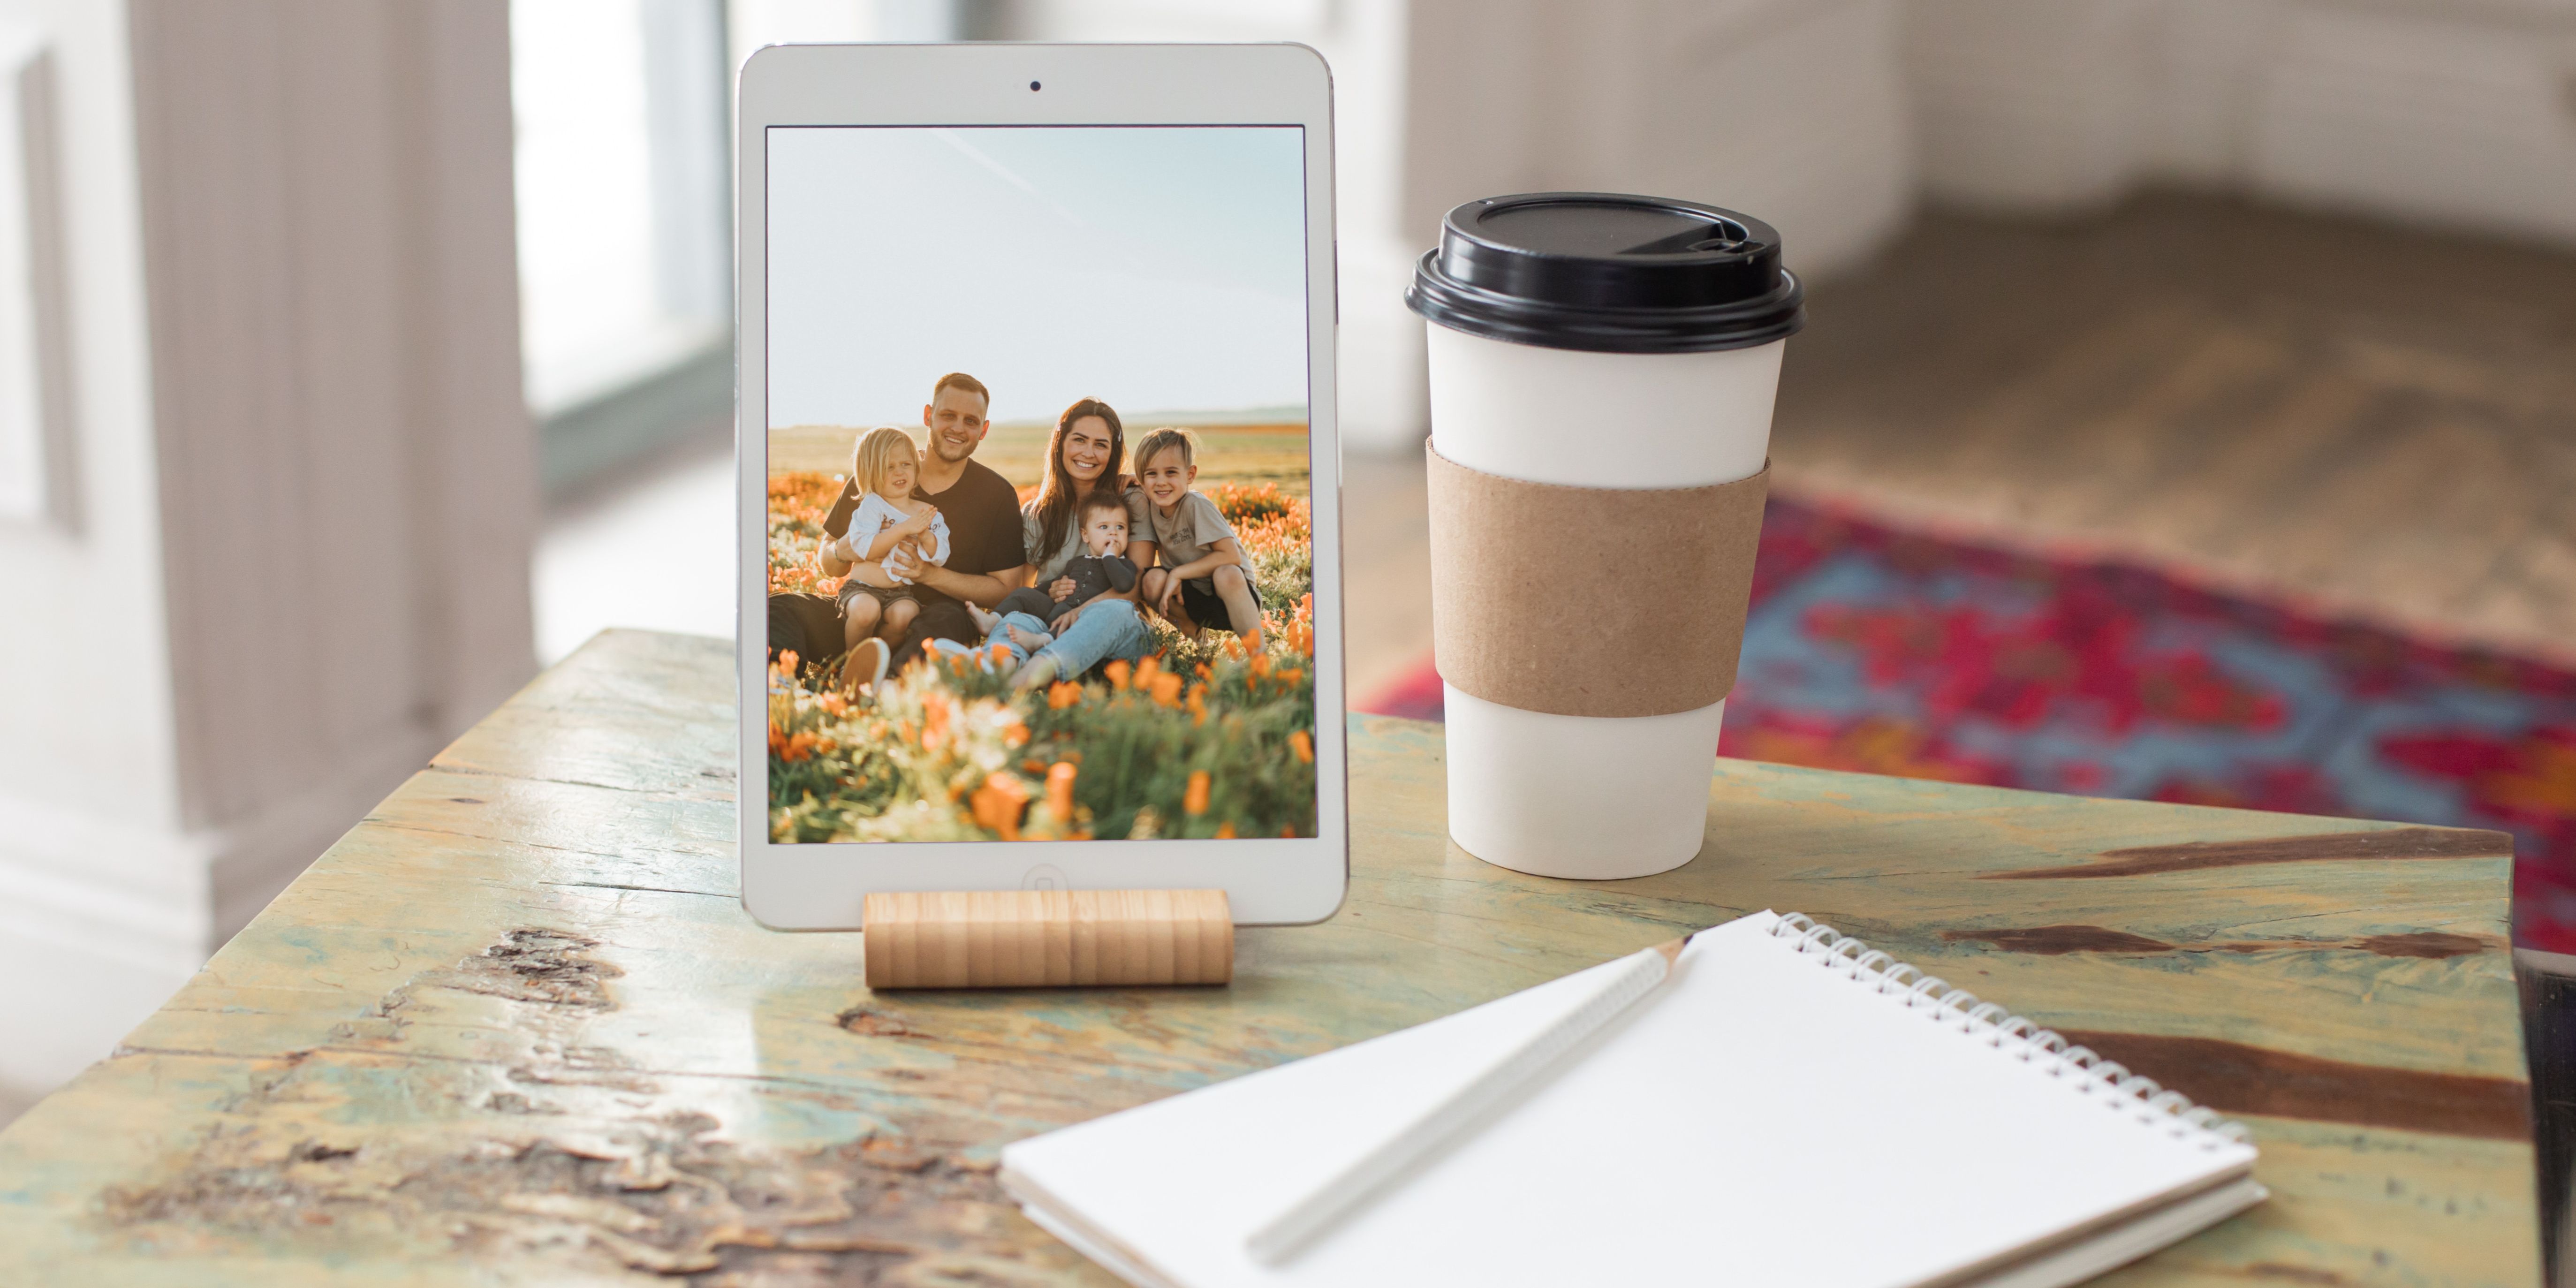 iPad mini on a wooden table next to a cup of coffee and a notepad, displaying a family photo